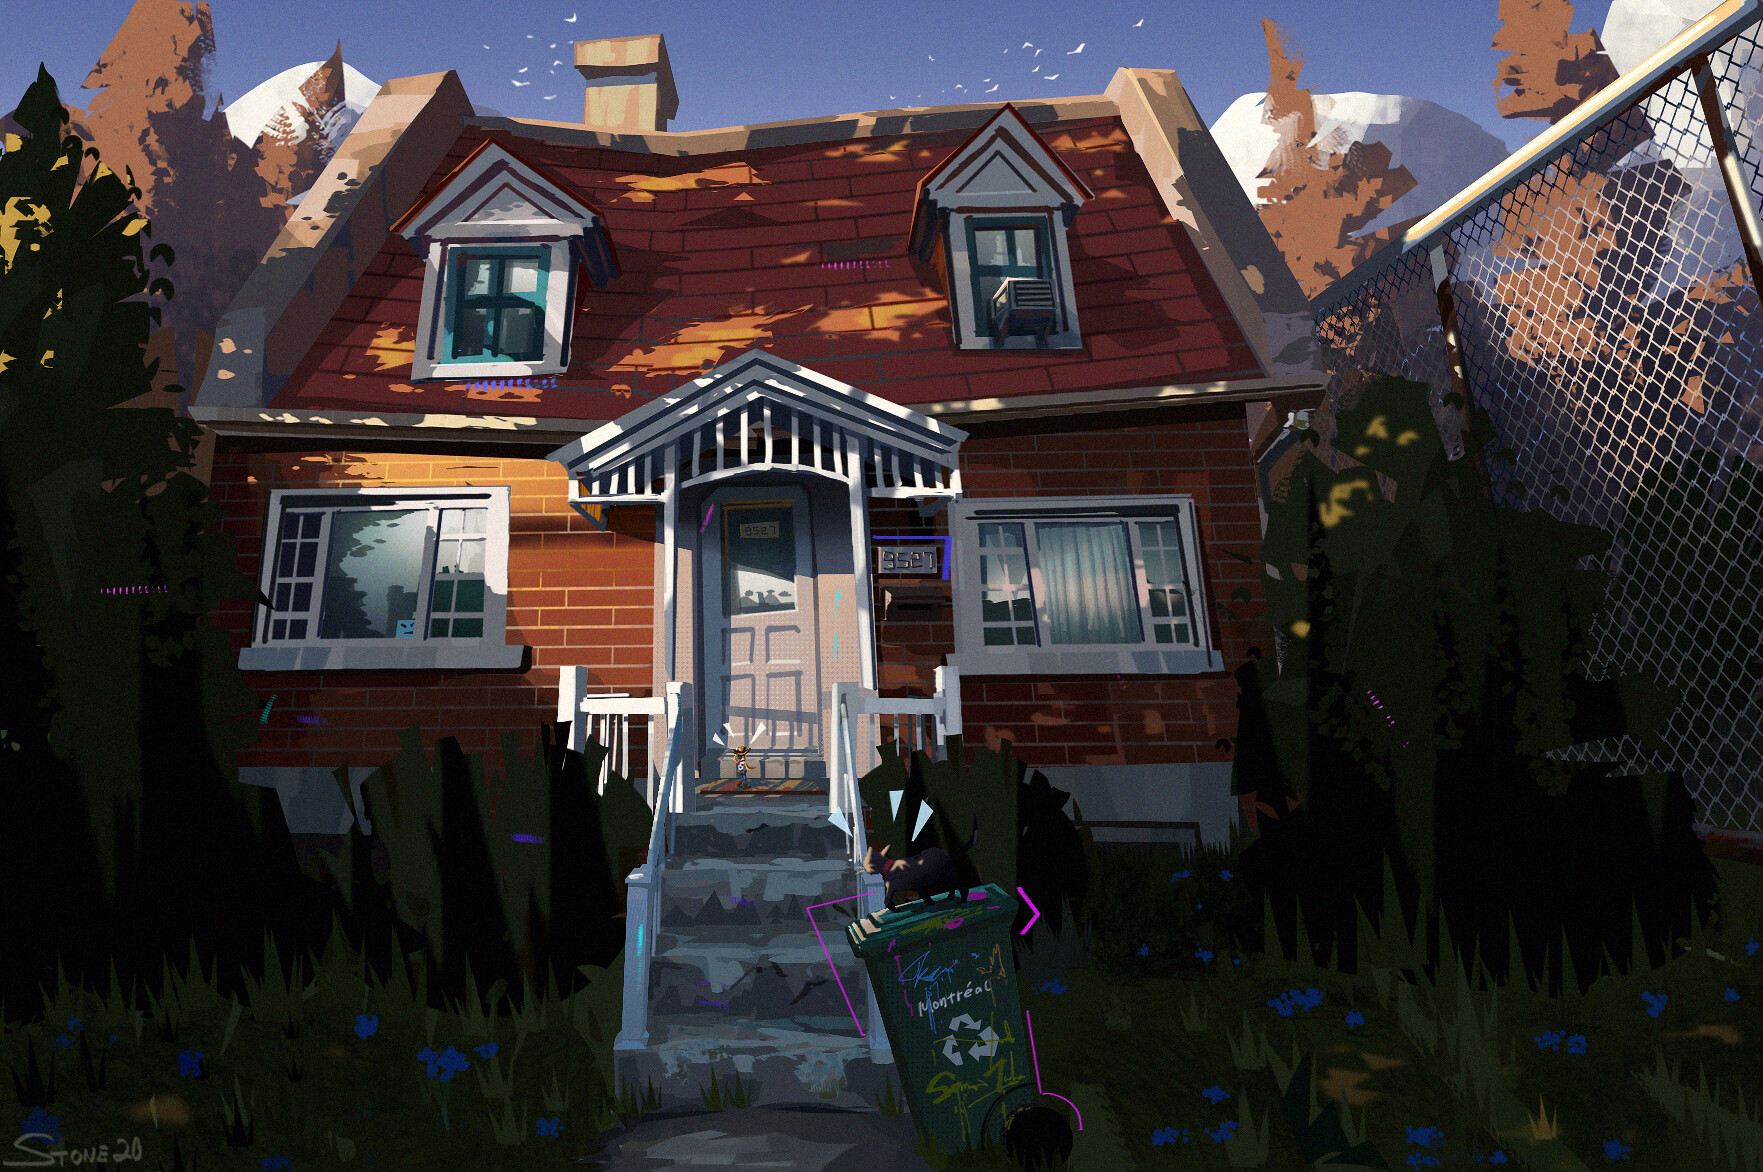 ArtStation - No texture study 2: the house in shadow